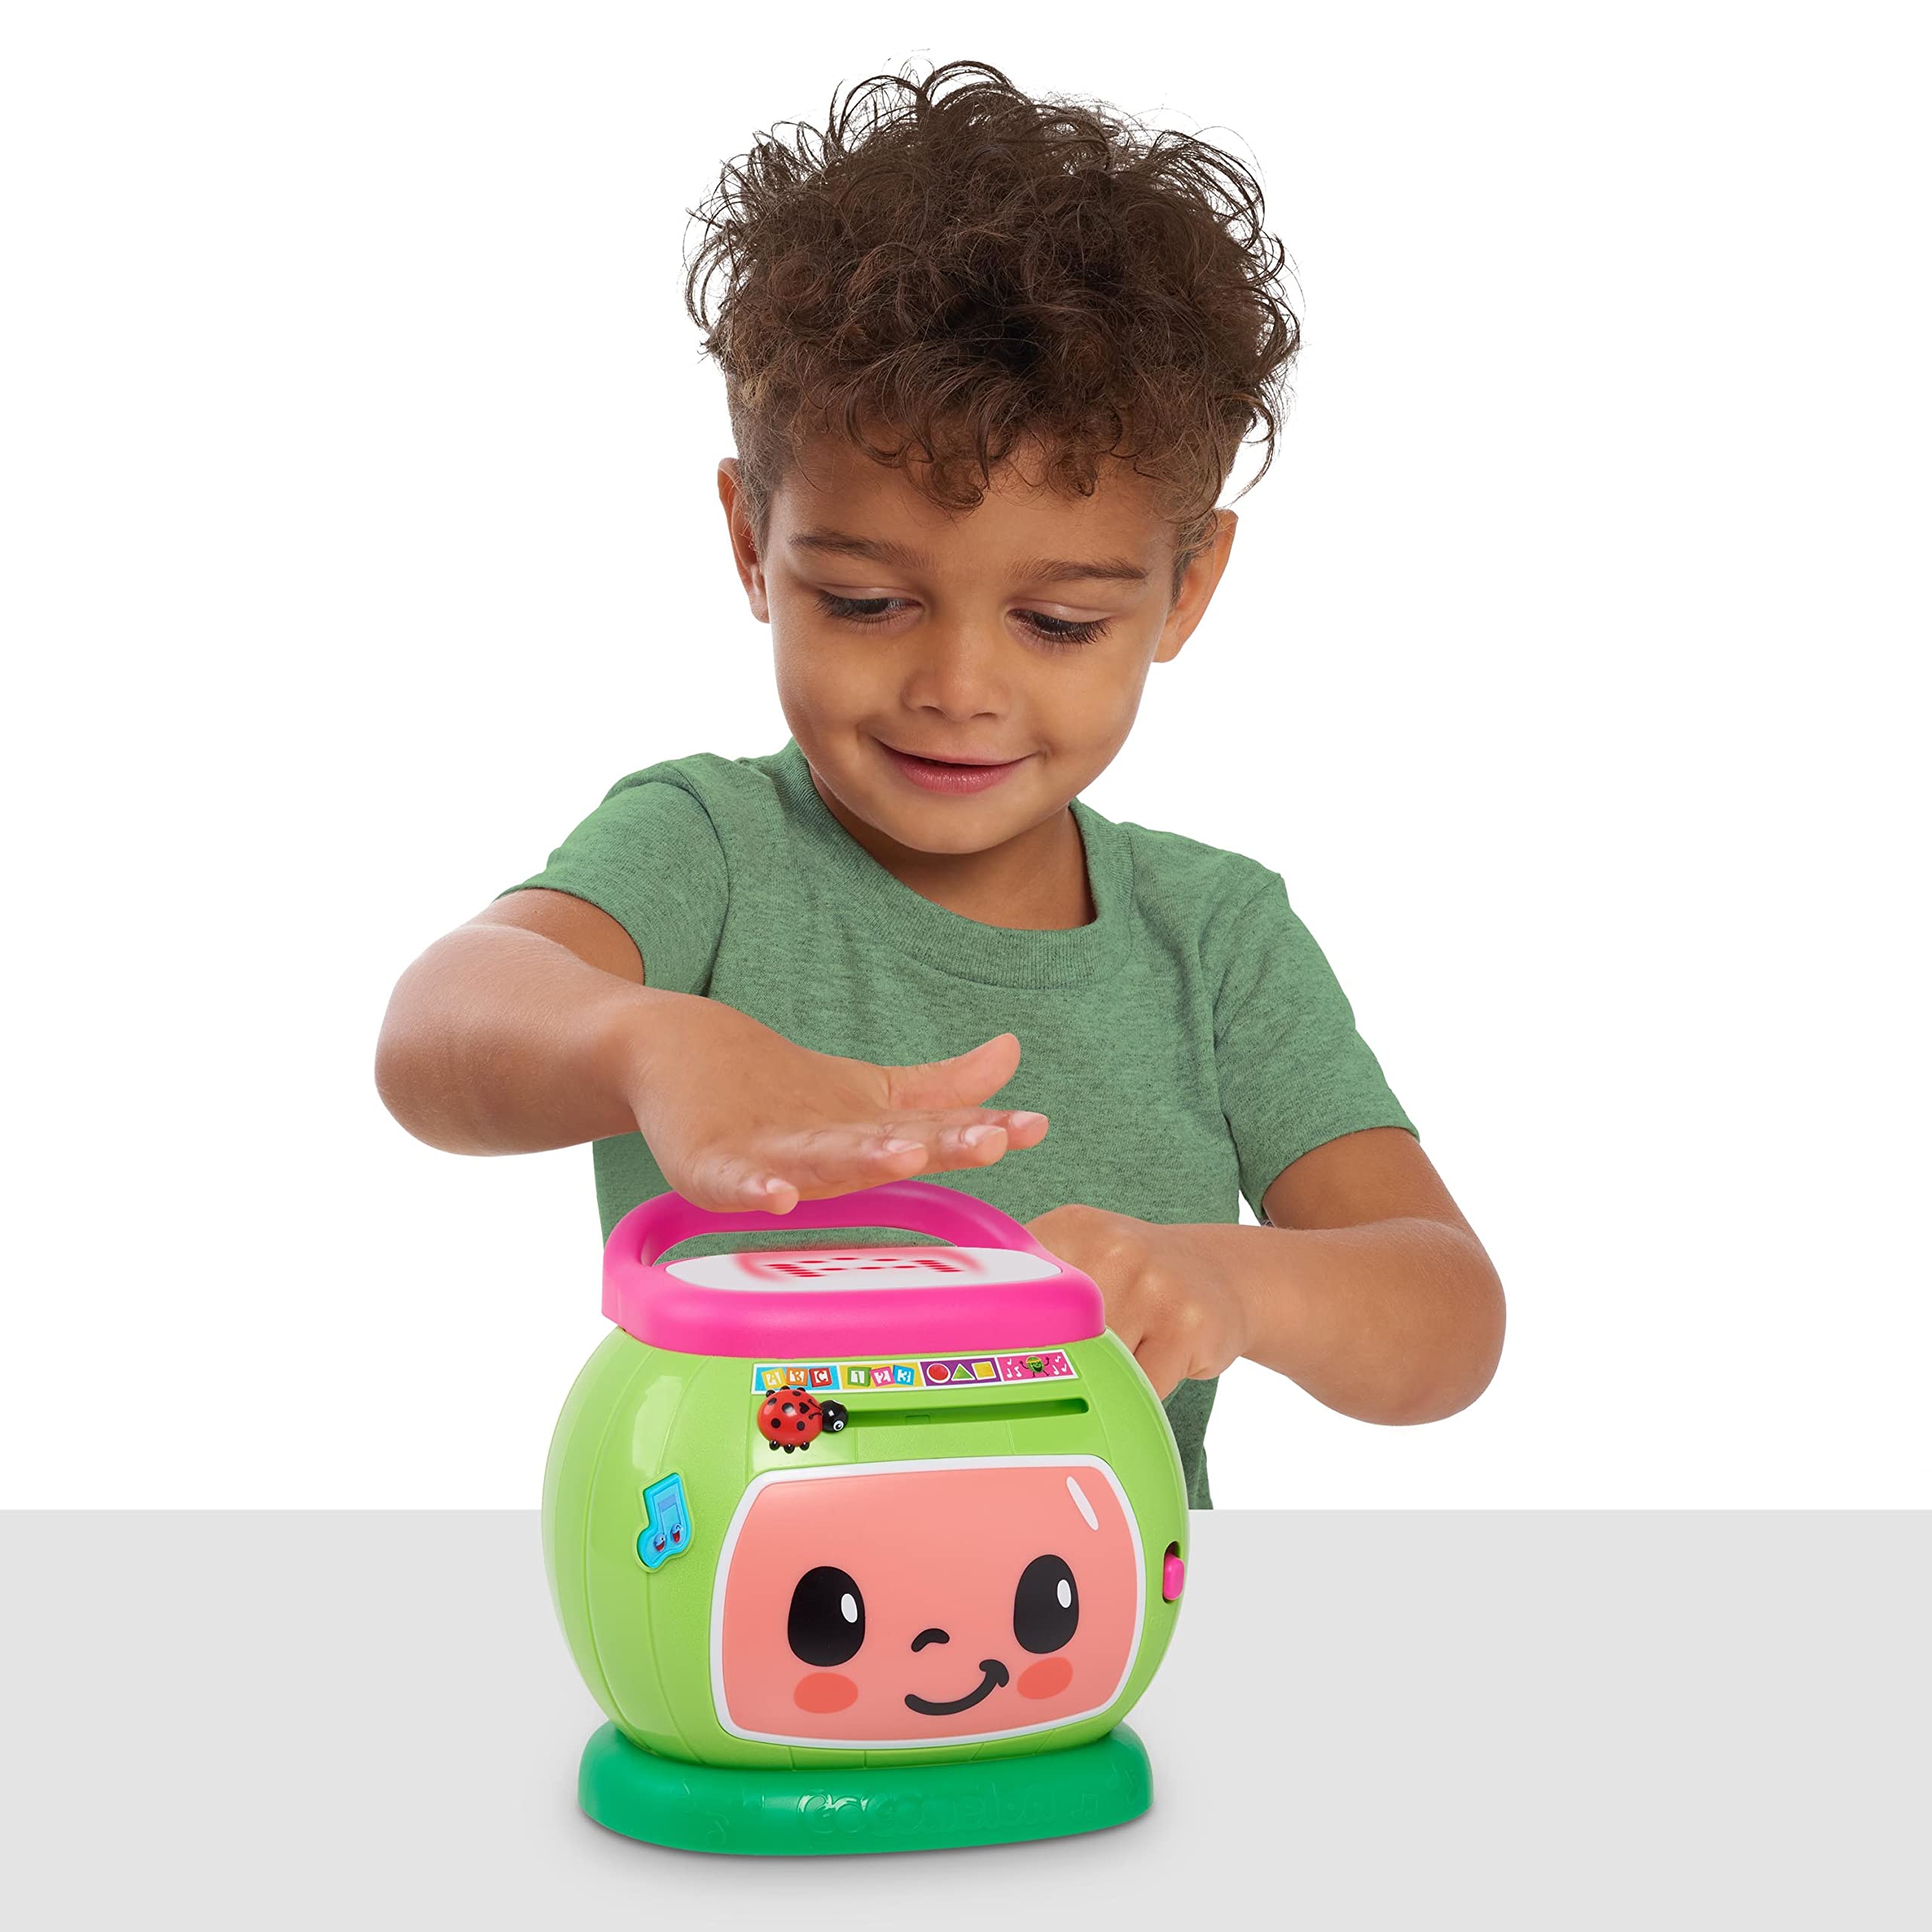 **Price Drop** 6" Just Play Cocomelon Learning Melon Drum w/ Interactive Lights & Sounds $8.70 + Free Shipping w/ Prime or on $25+